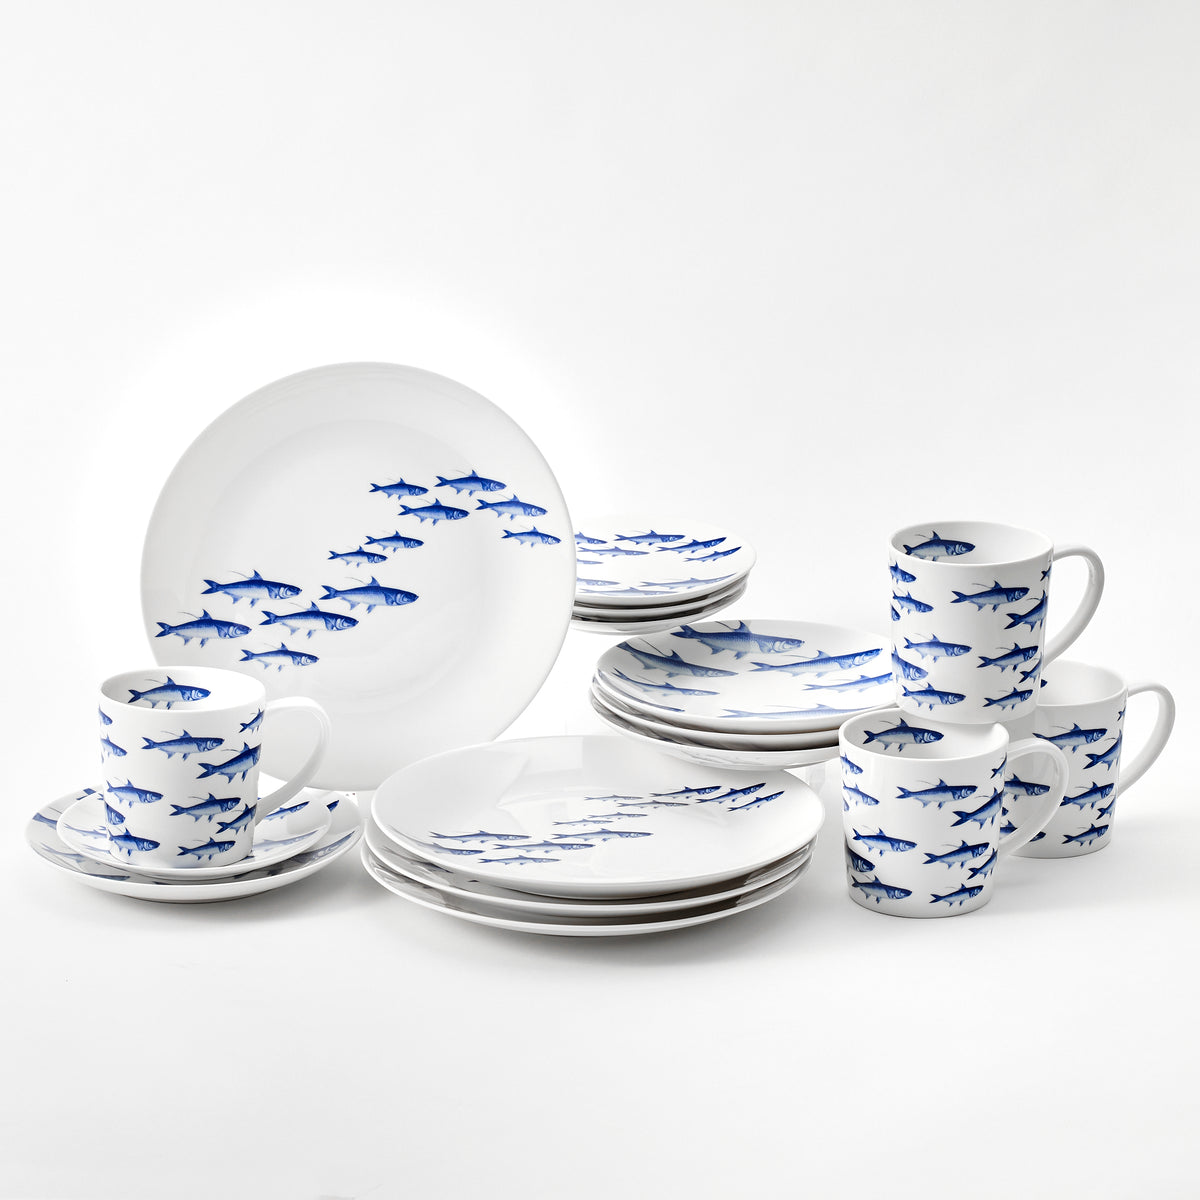 School of Fish 16 piece dinnerware set in blue and white porcelain from Caskata